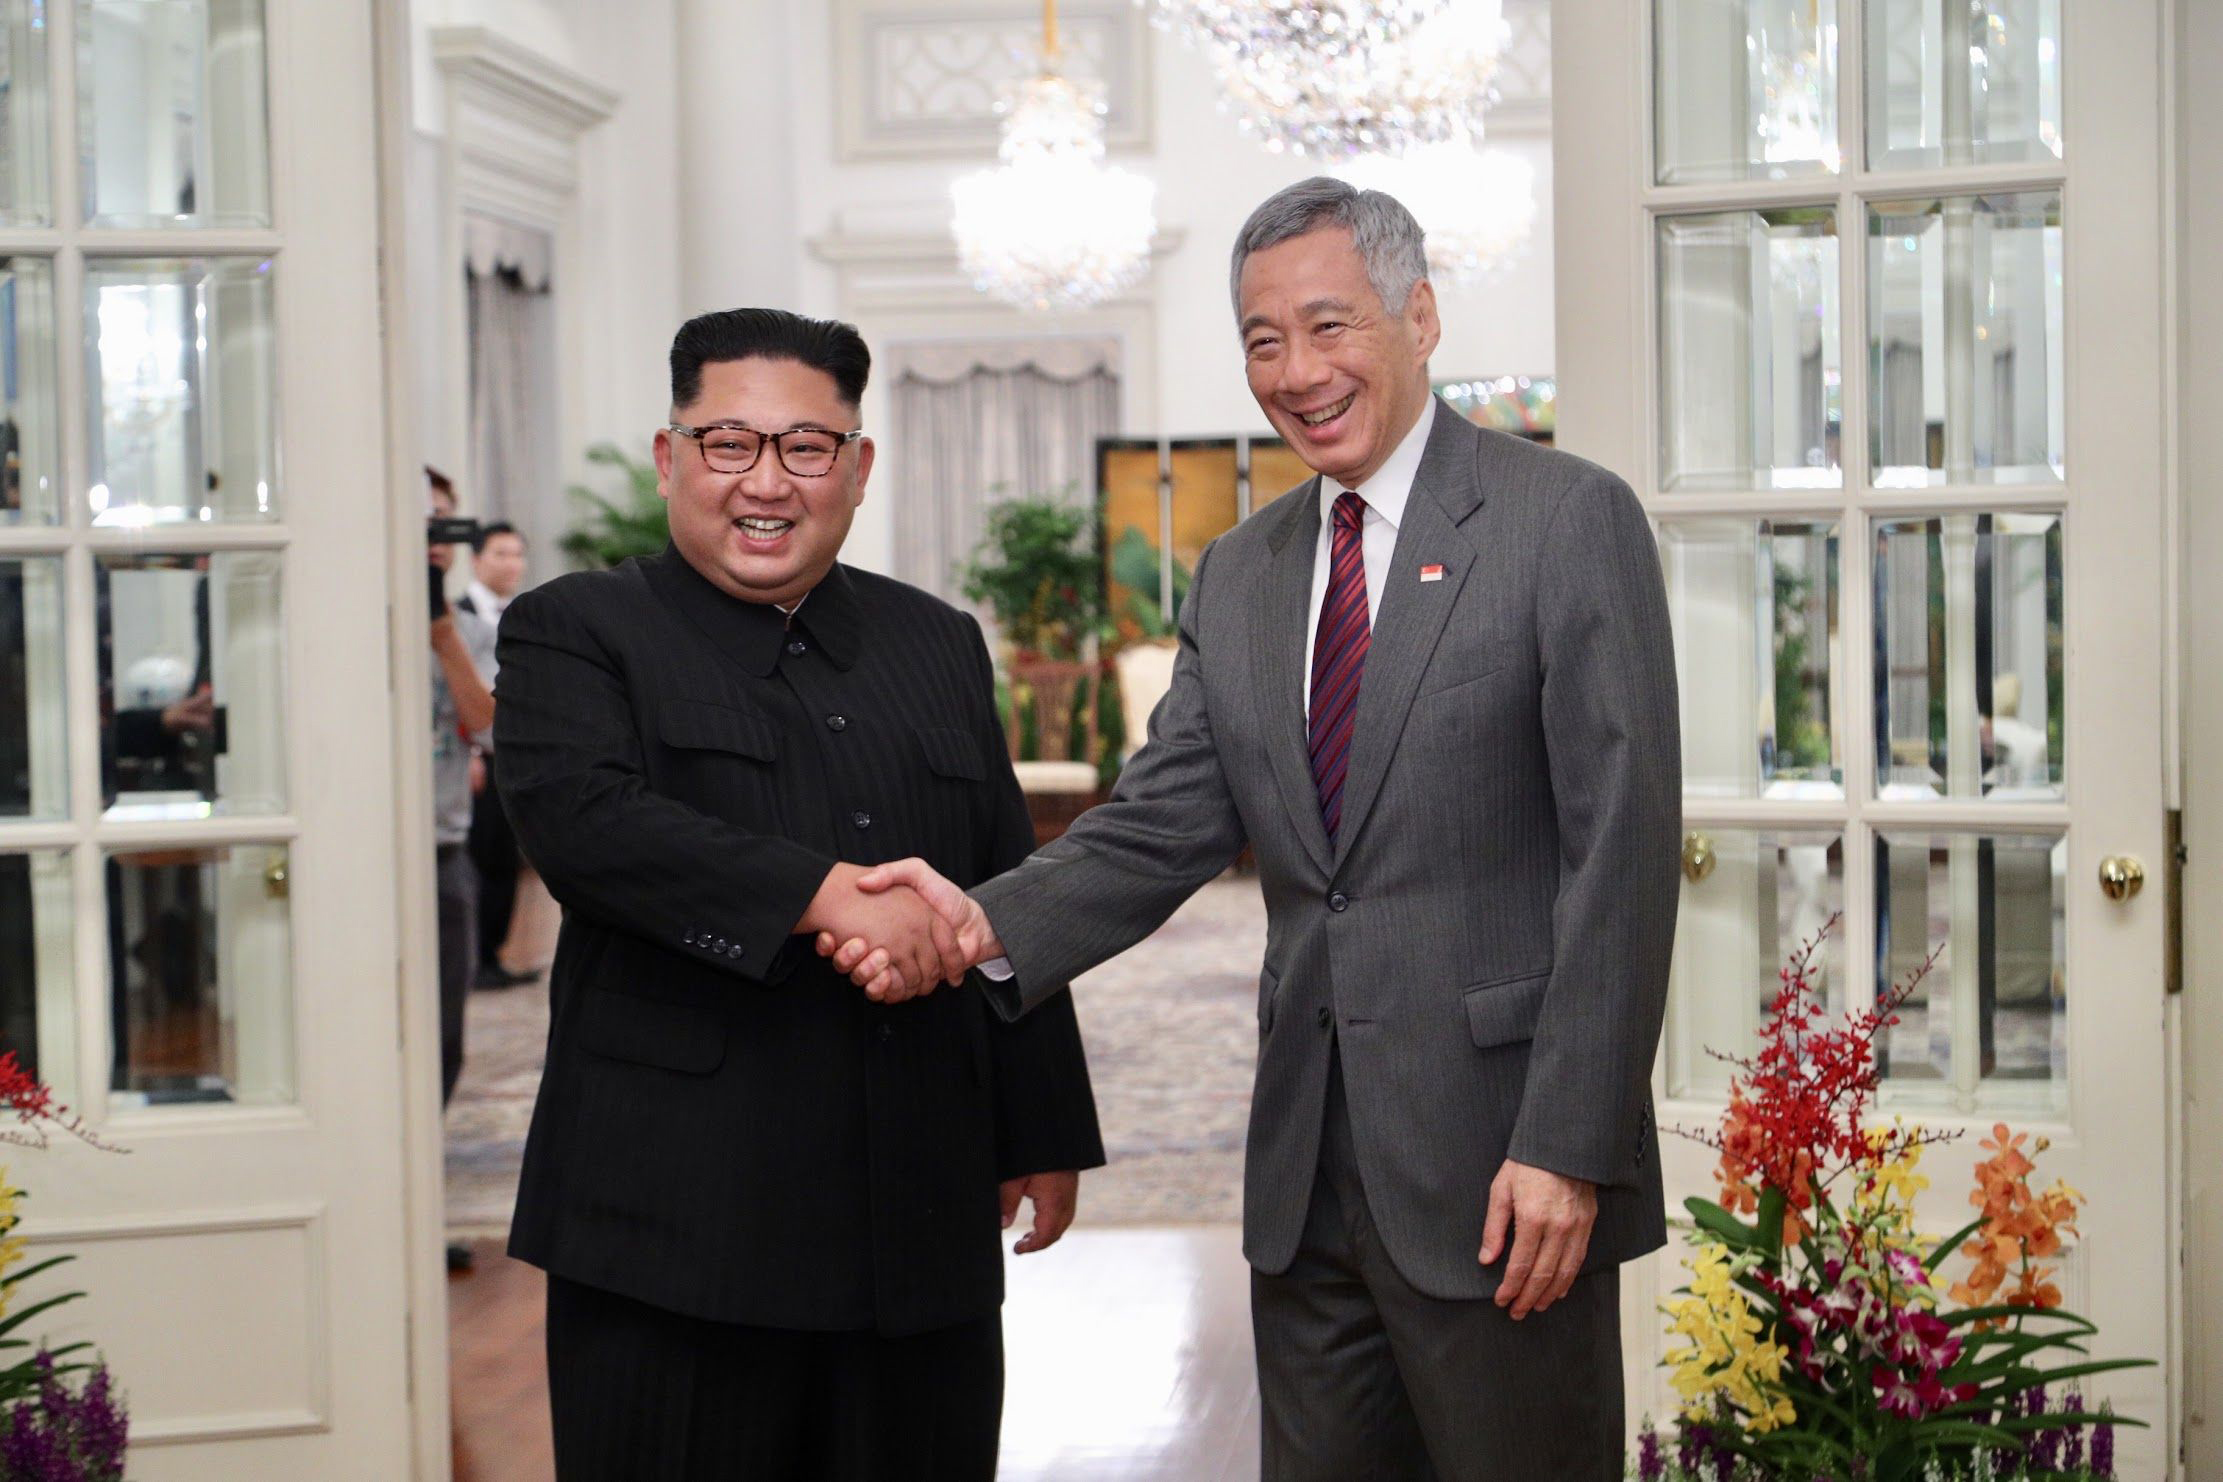 PHOTO: North Korean leader Kim Jong-un (L) and Singapore Prime Minister Lee Hsien Loong (R) shake hands during their meeting at the Istana Presidential Palace in Singapore, June 10, 2018.